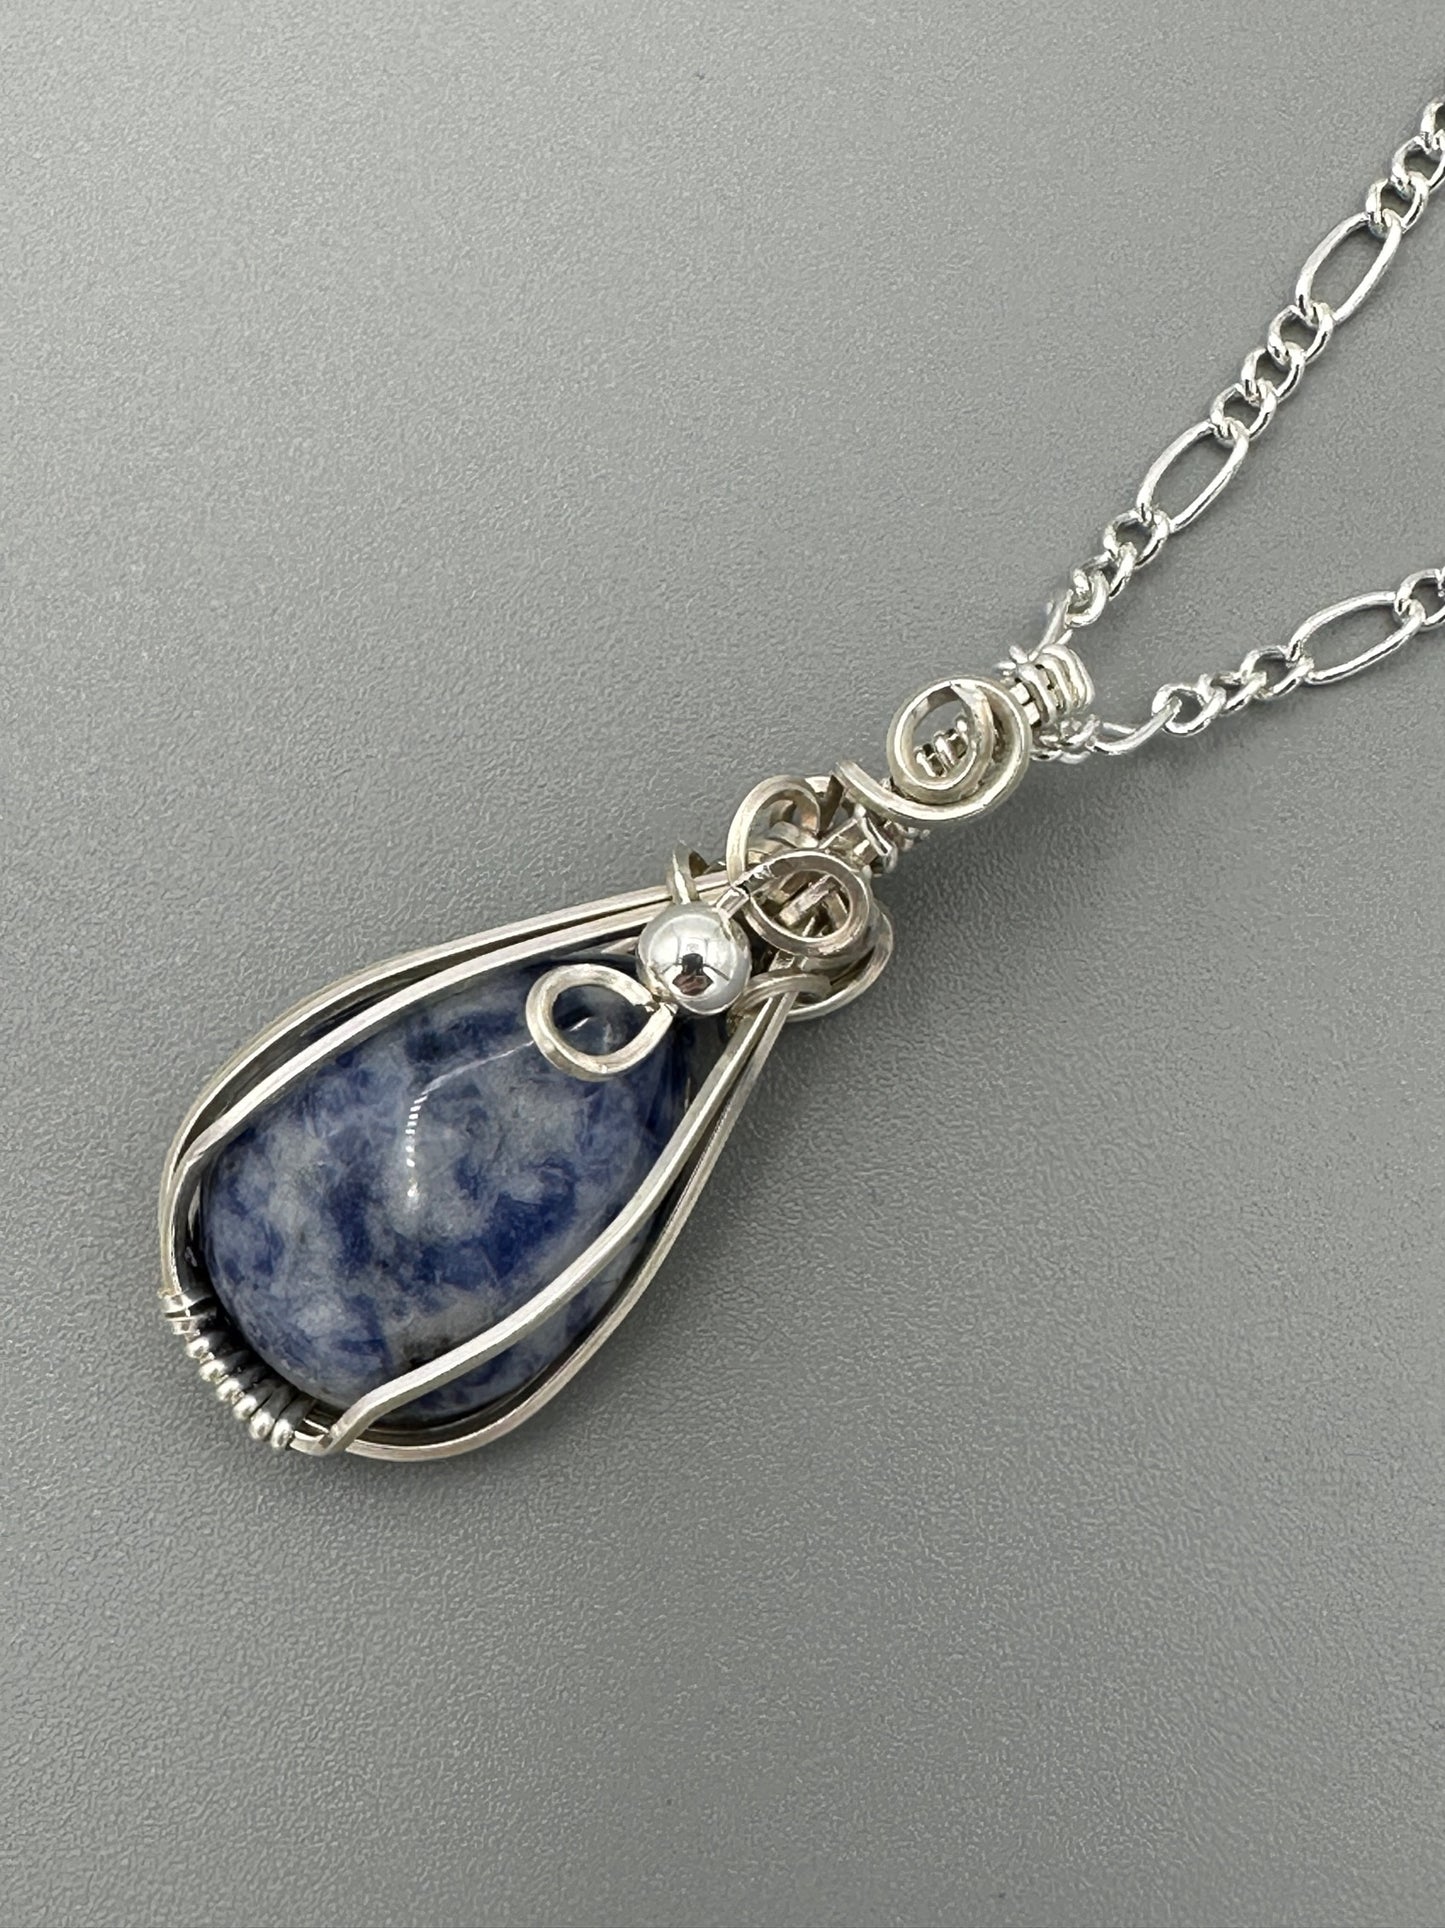 Small Snowflake Sodalite Teardrop Pendant Wrapped in Argentium Wire